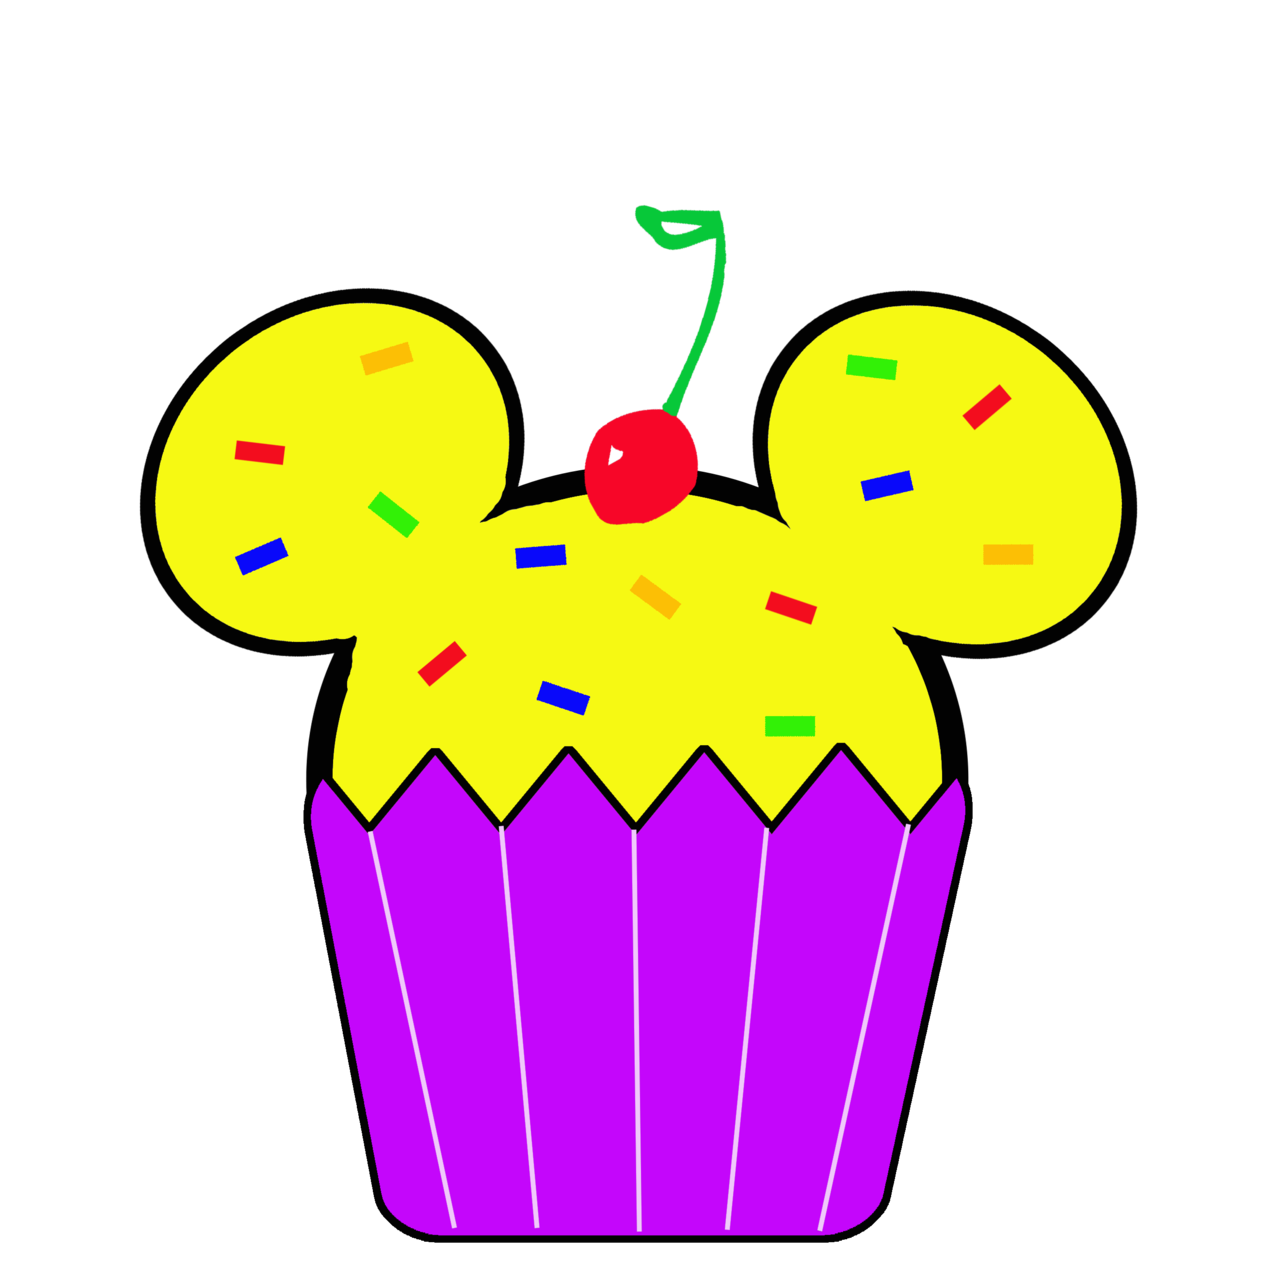 Mickey cupcake clipart? - The DIS Discussion Forums - DISboards ...